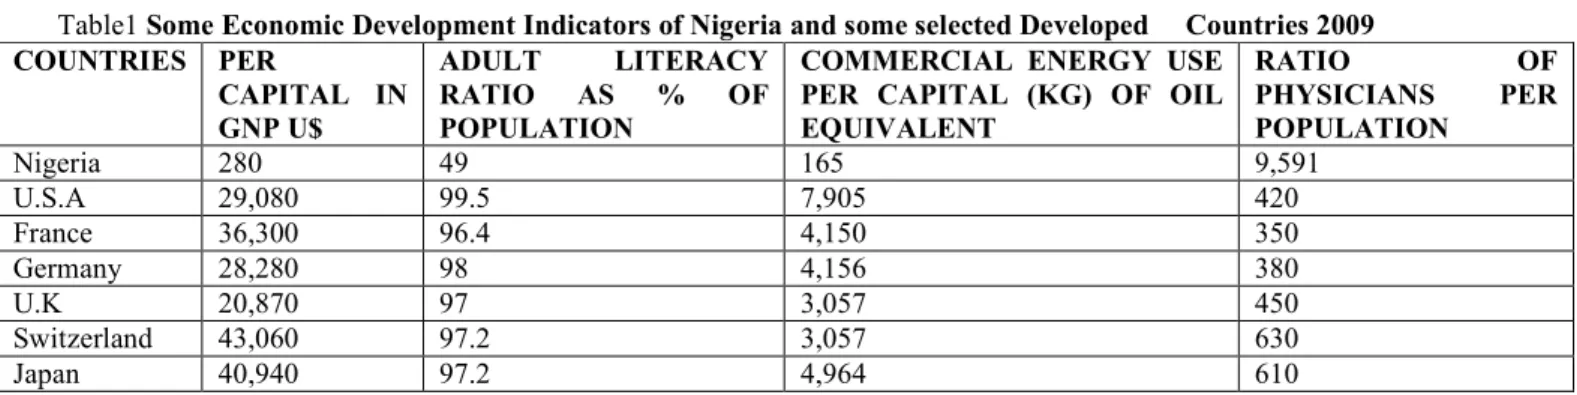 Table 1 above shows some economic development indicators of Nigeria and some selected developed countries